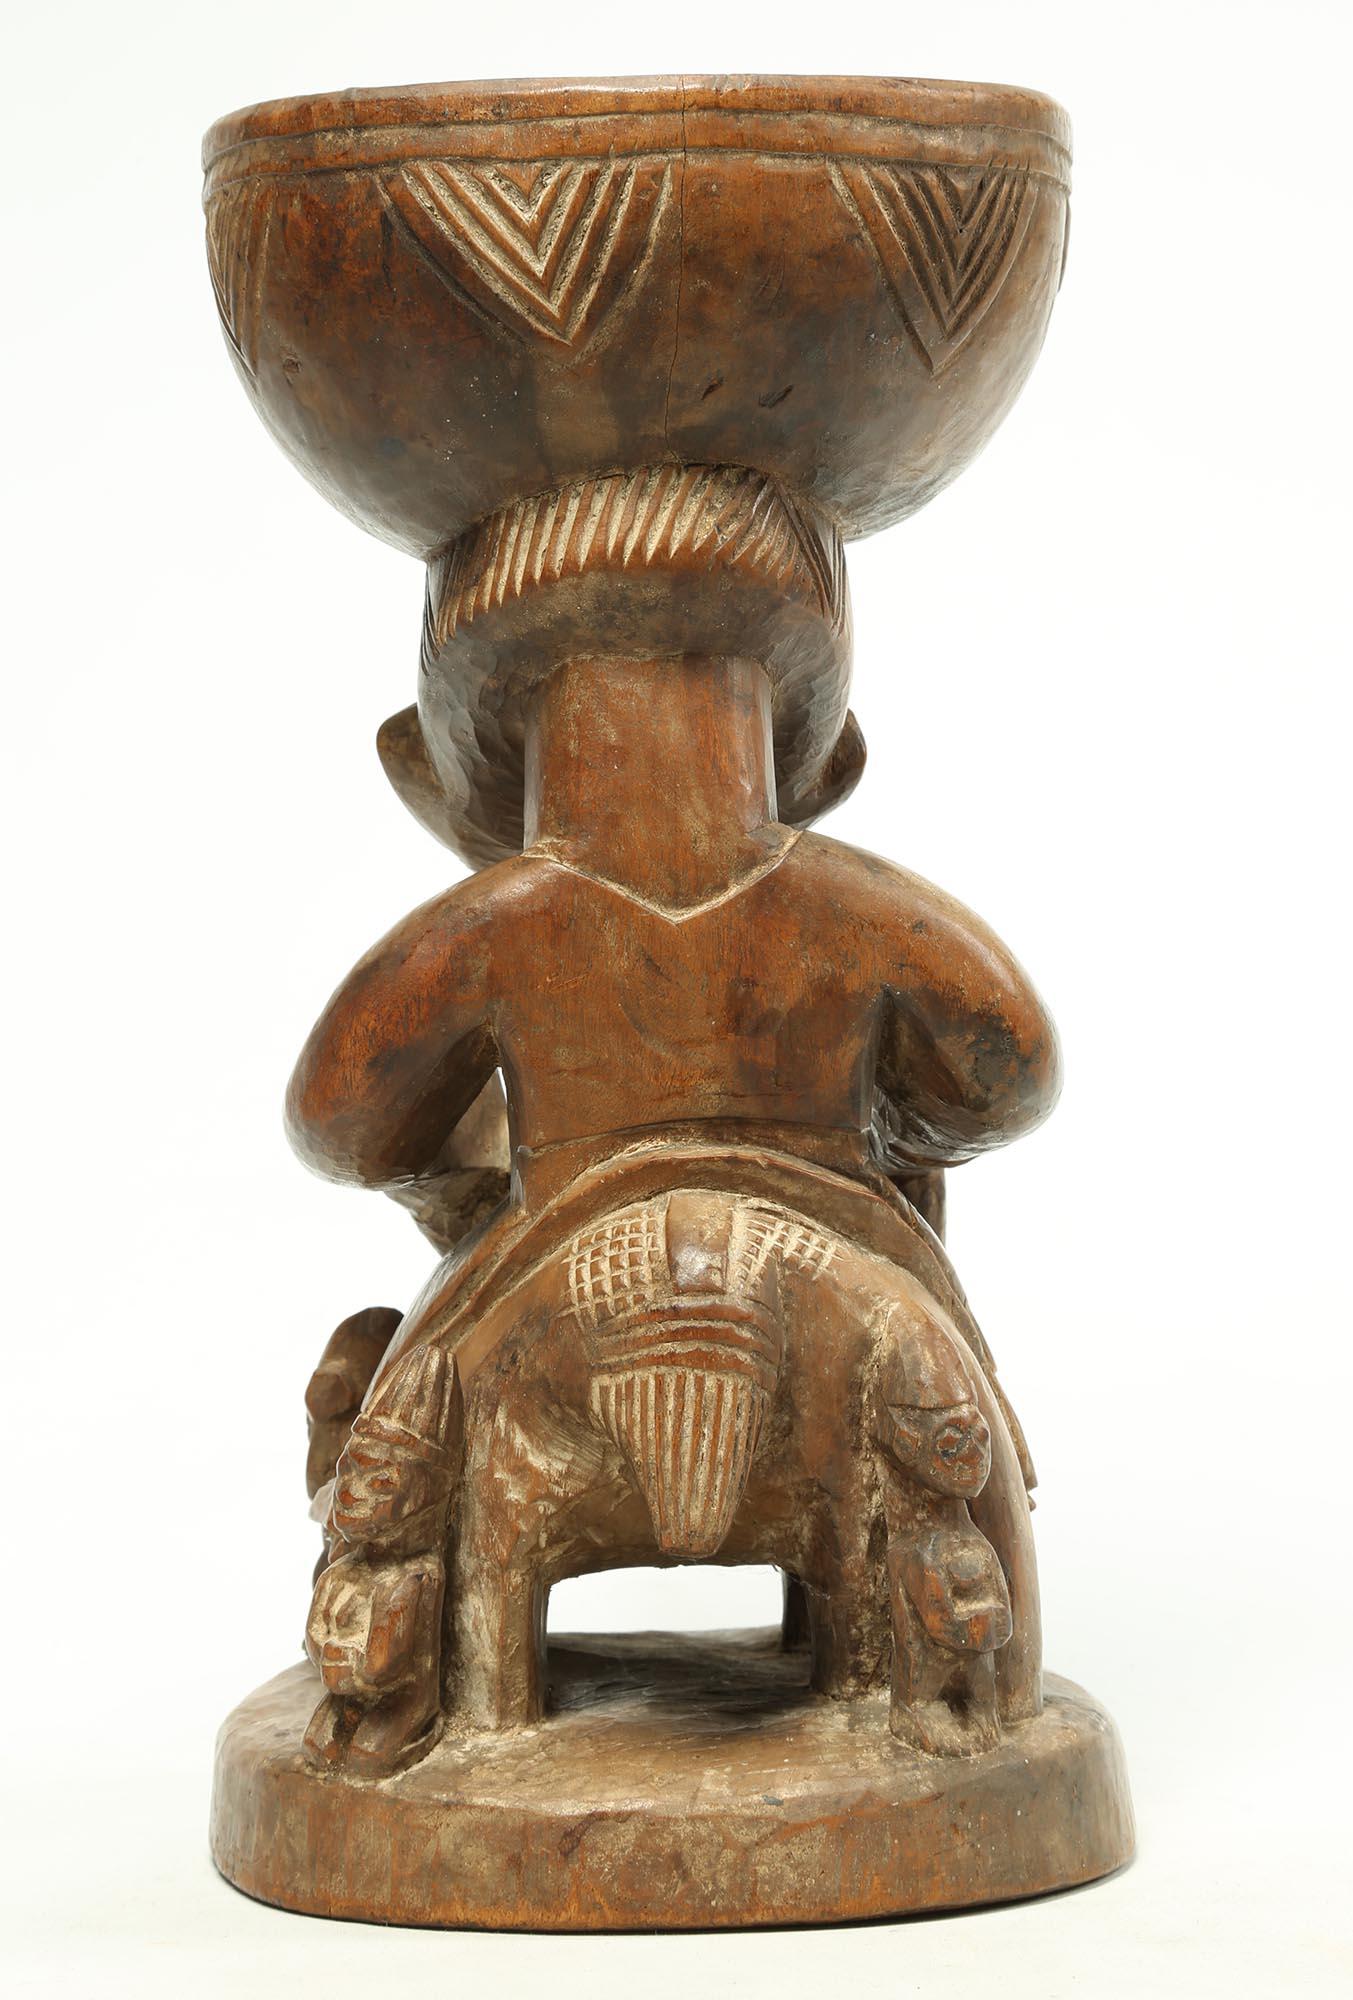 Yoruba Offering Bowl with Horse and Rider Early 20th Century Nigerian Tribal Art For Sale 2